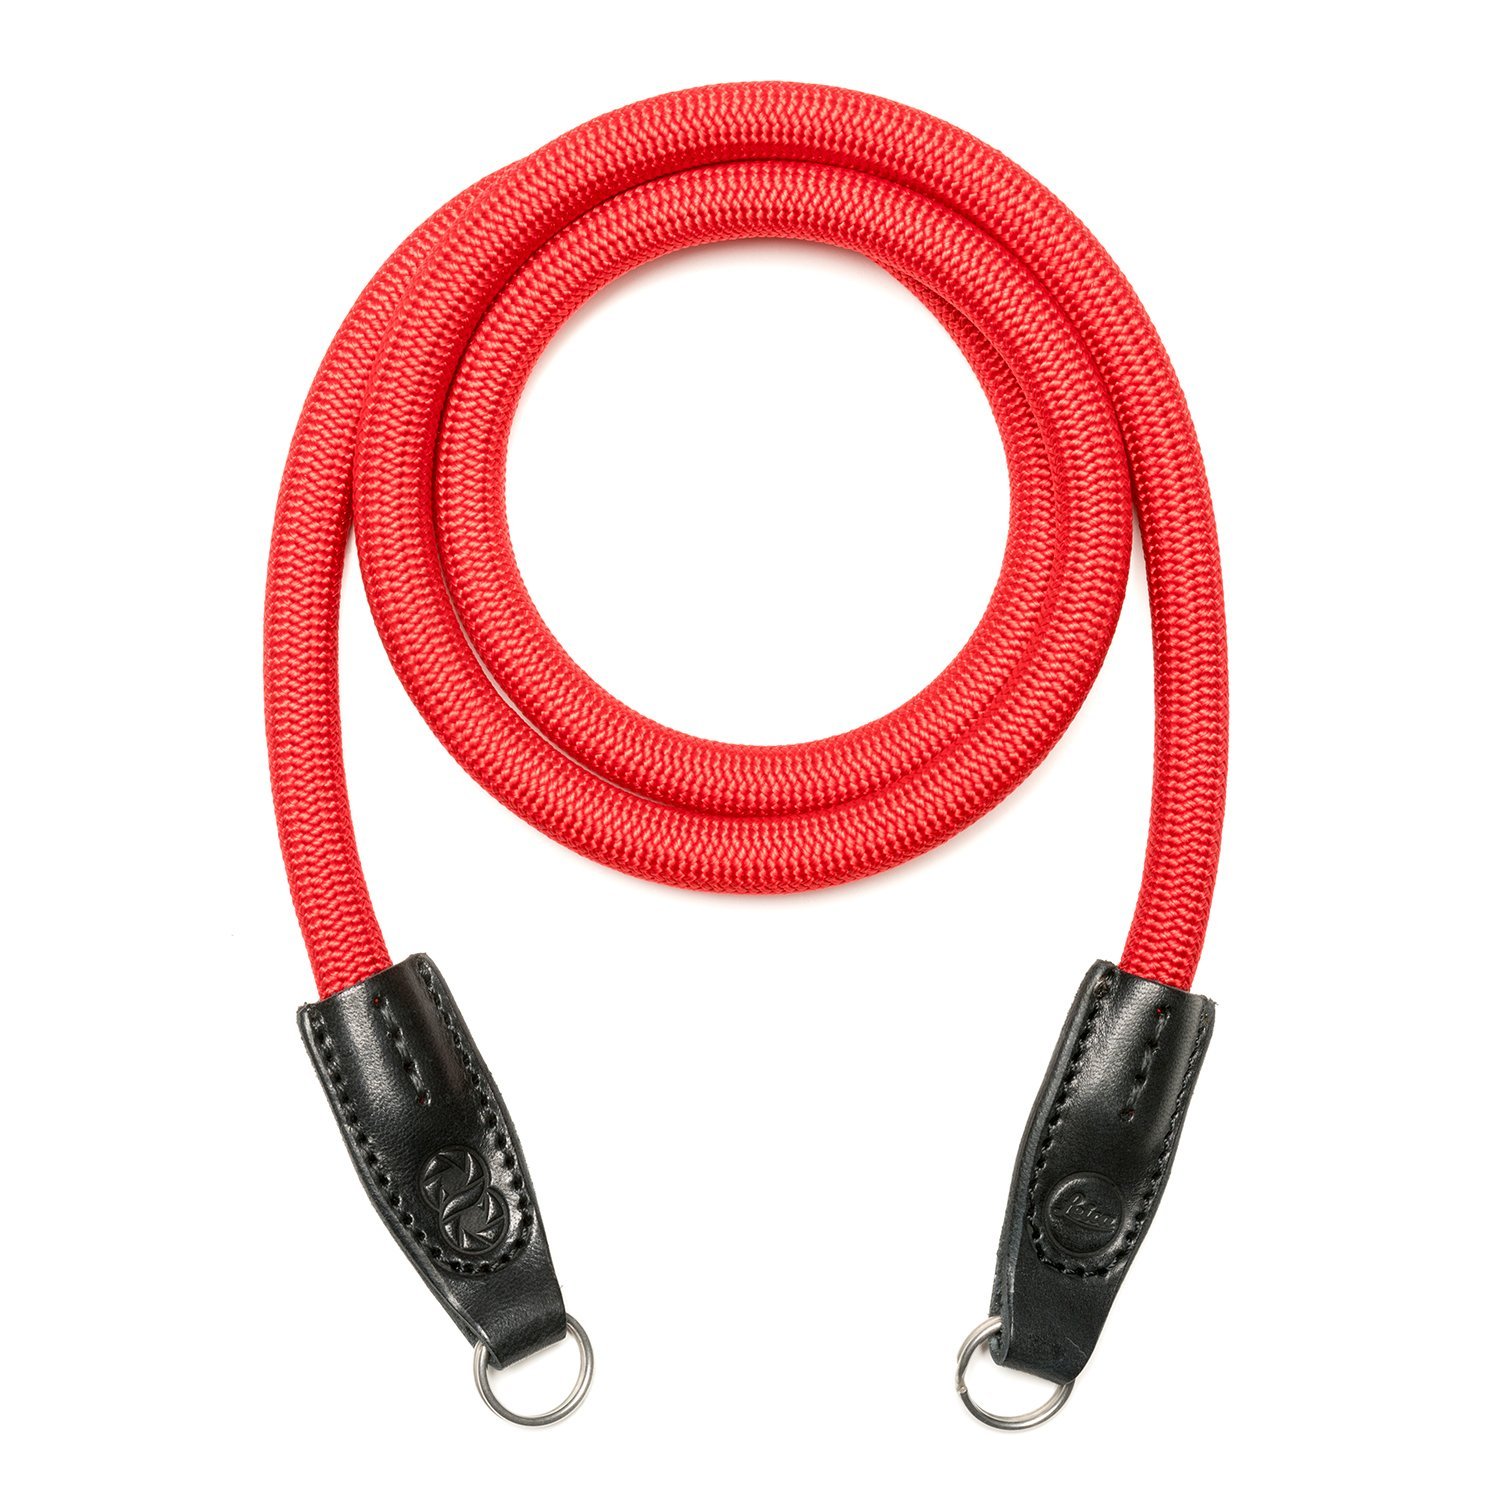 TThumbnail image for Leica COOPH Rope Strap - Red